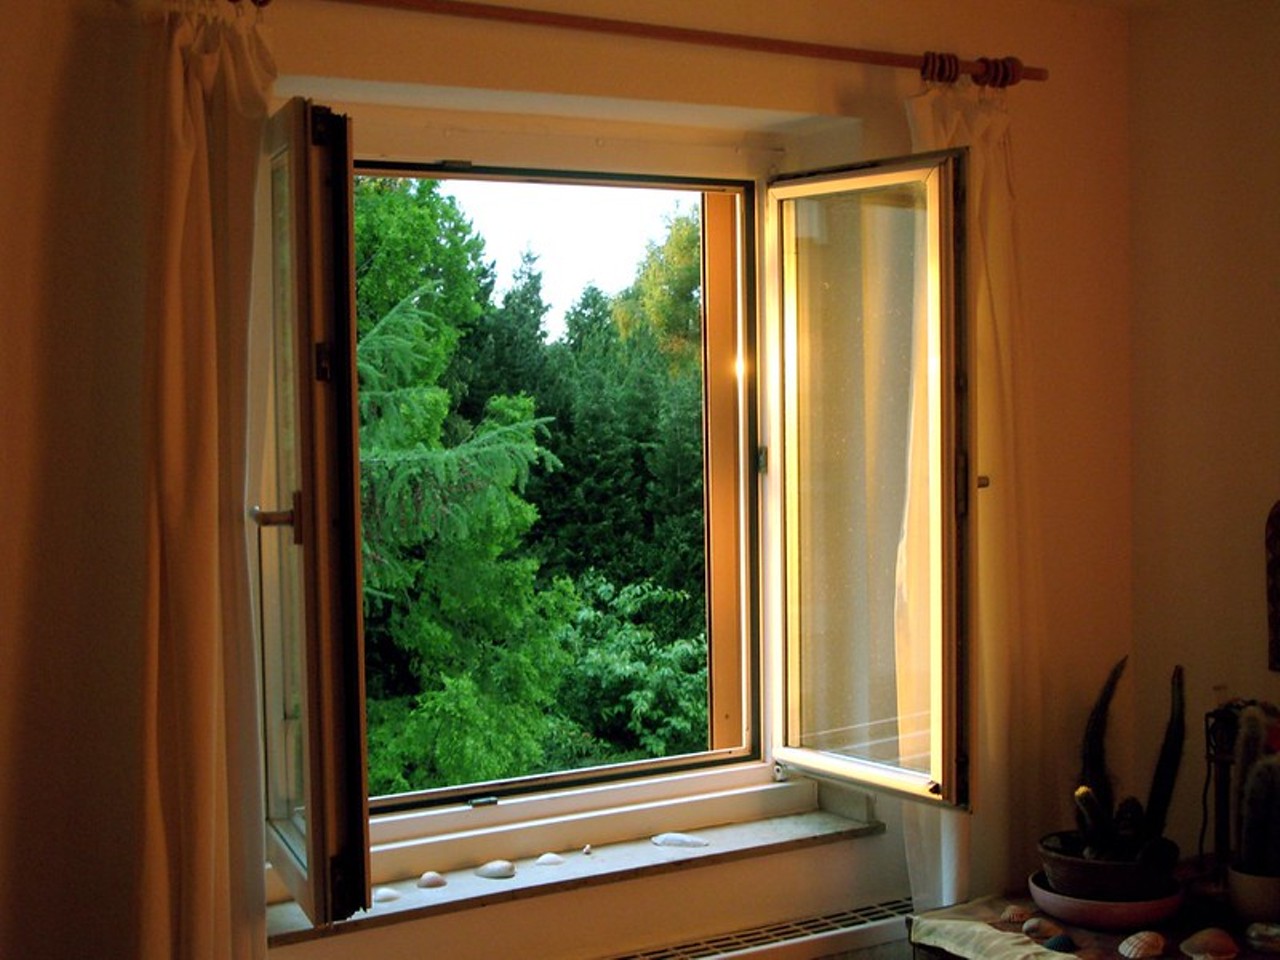 Open your windows.
Air out your space if you can. If it&#146;s at all nice outside, get some fresh air circulating. Well-ventilated rooms are a must.
Photo credit: glasseyes view / Flickr